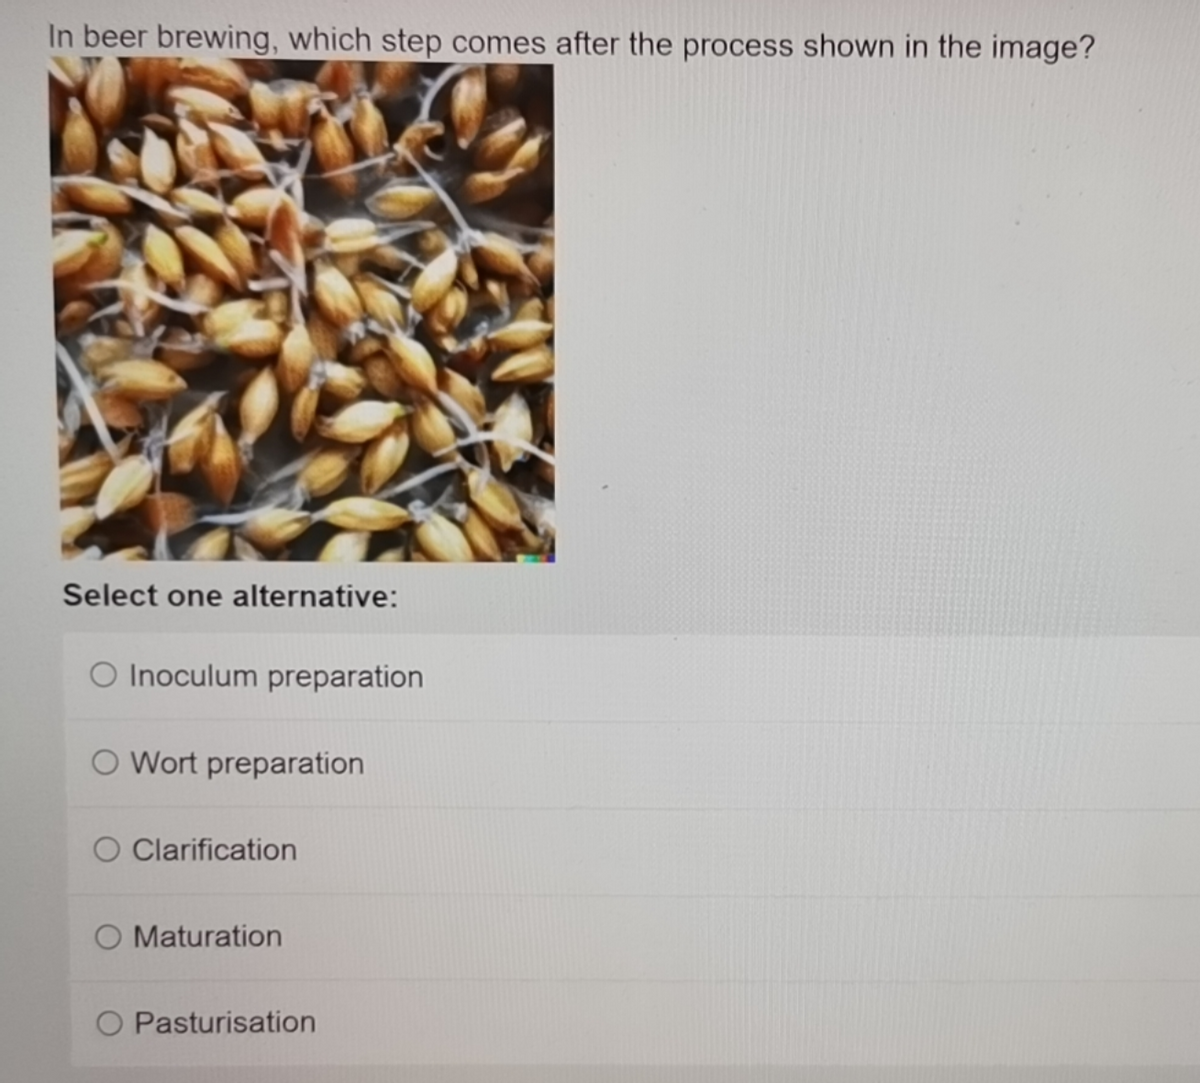 In beer brewing, which step comes after the process shown in the image?
Select one alternative:
O Inoculum preparation
O Wort preparation
O Clarification
O Maturation
Pasturisation